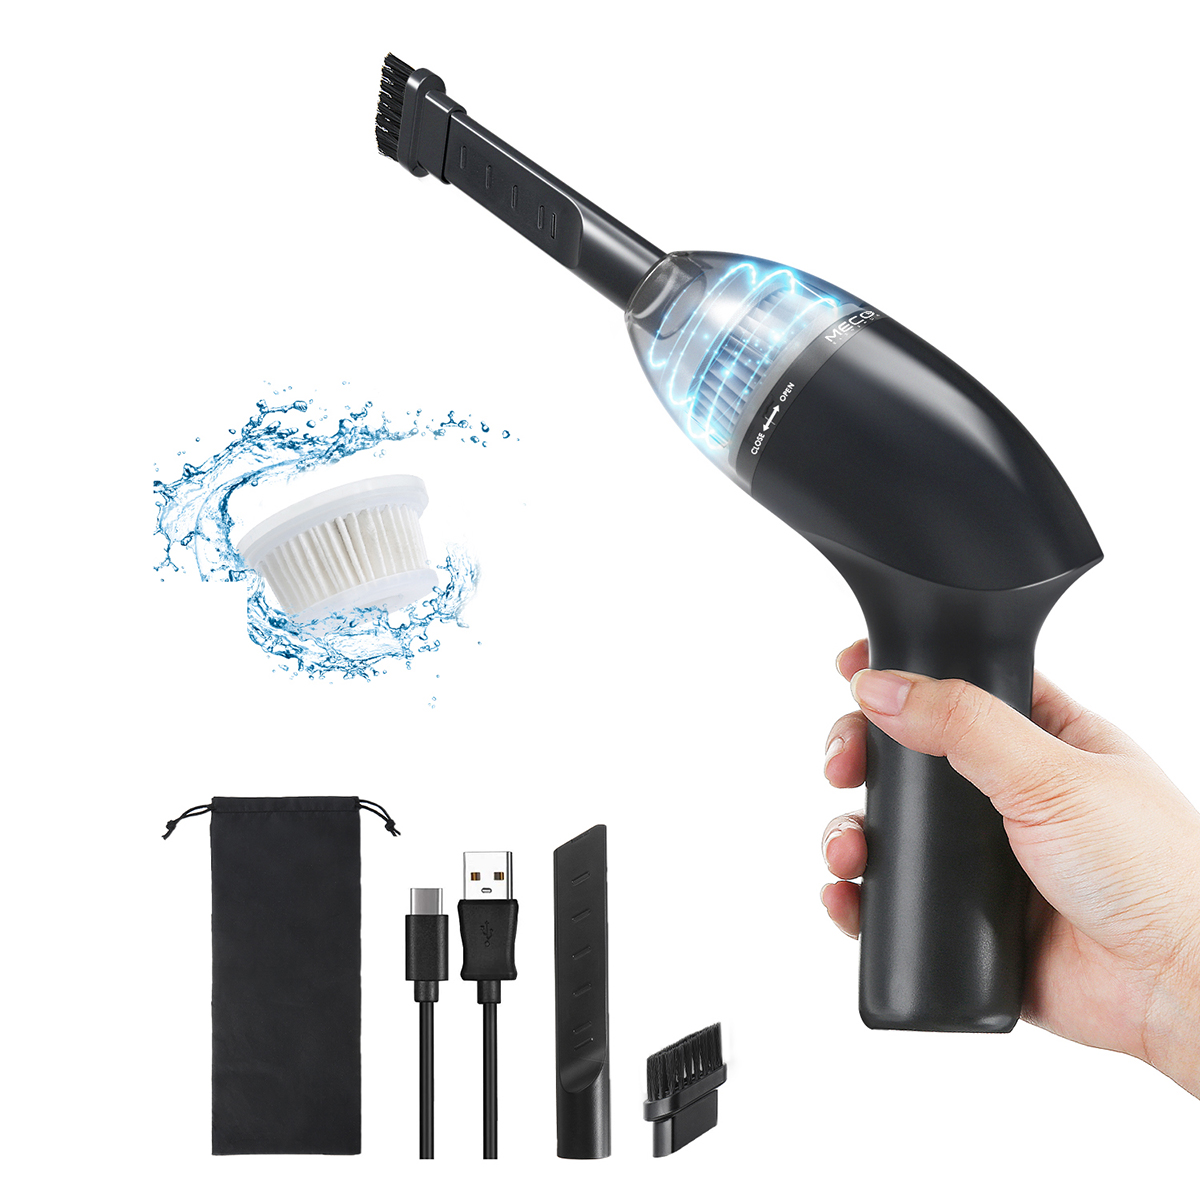 MECO-Mini-Vacuum-Cleaner-Keyboard-Cleaner-Rechargeable-65W-Cordless-Handheld-Desk-Cleaning-Machine-f-1850136-10